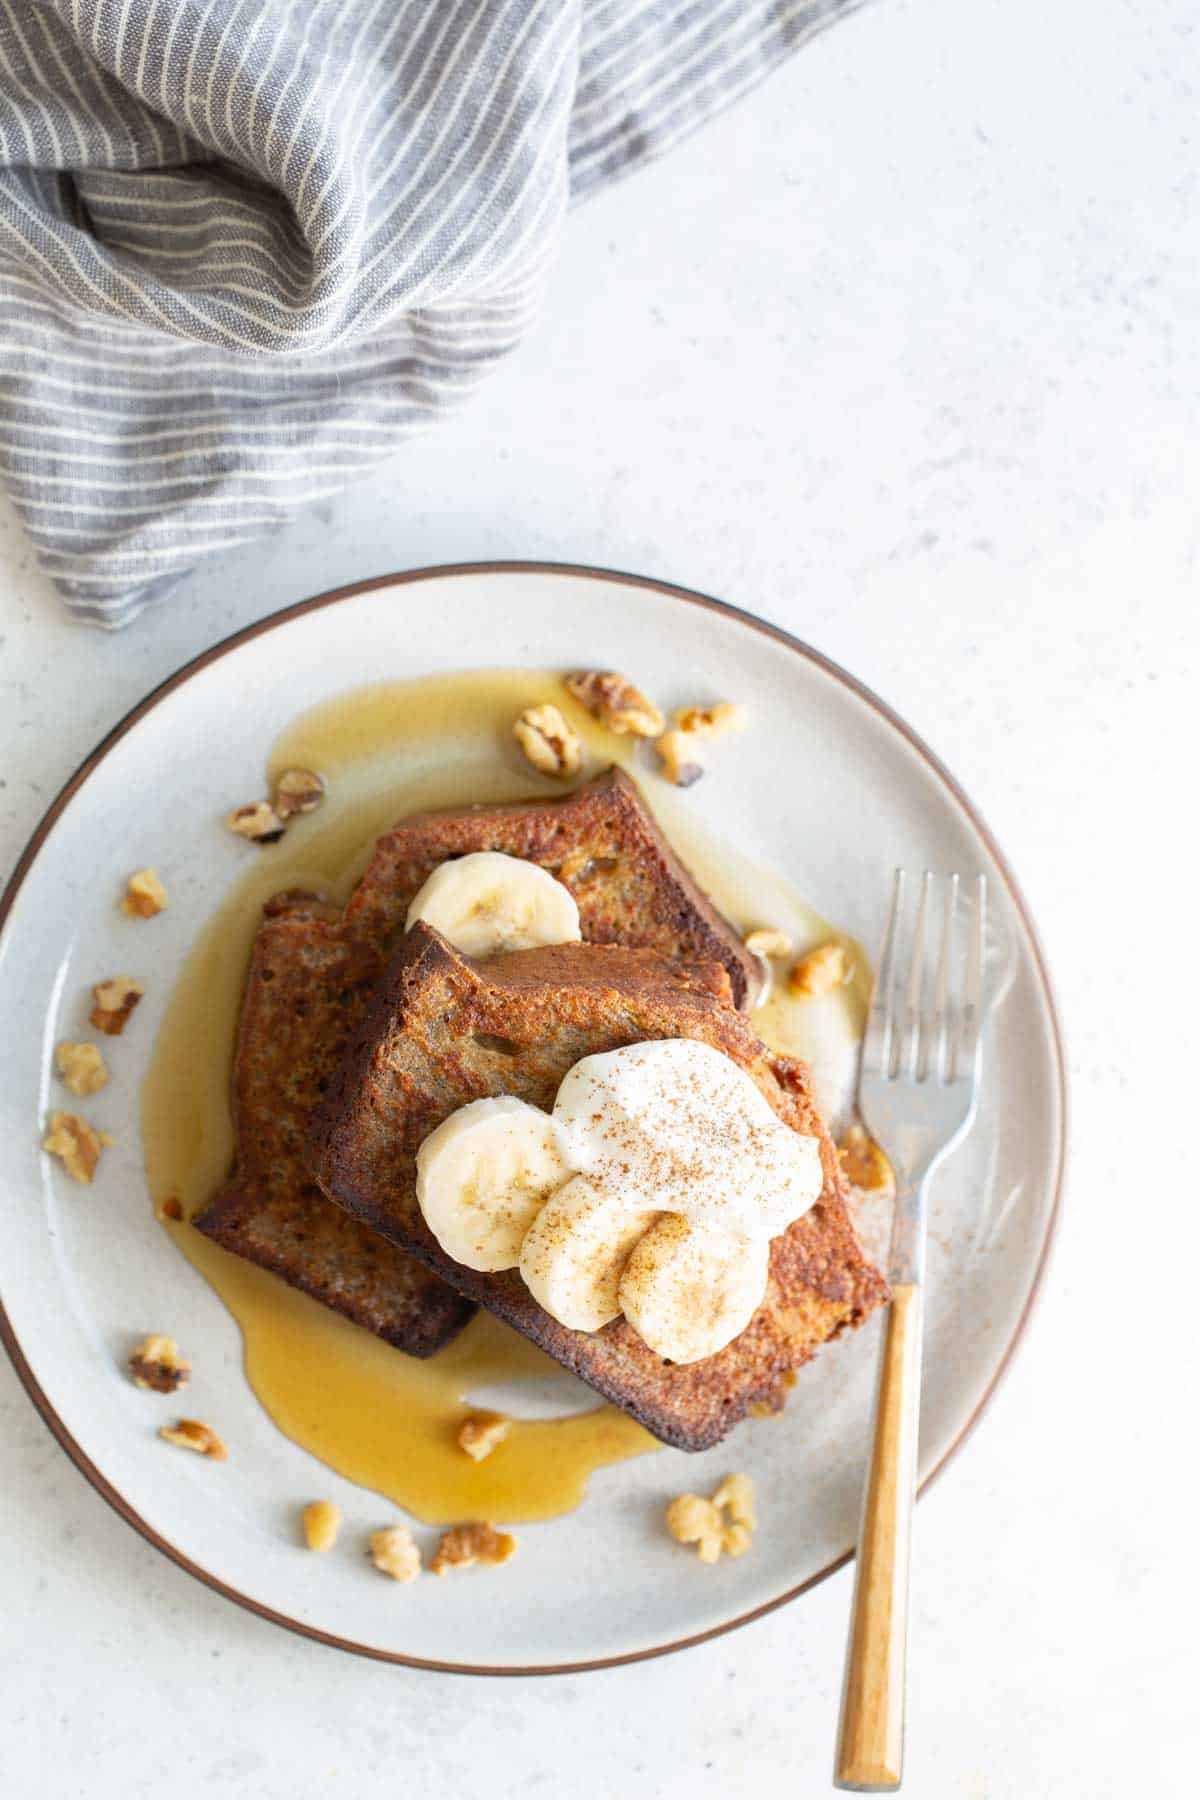 French toast with bananas and syrup on a plate.